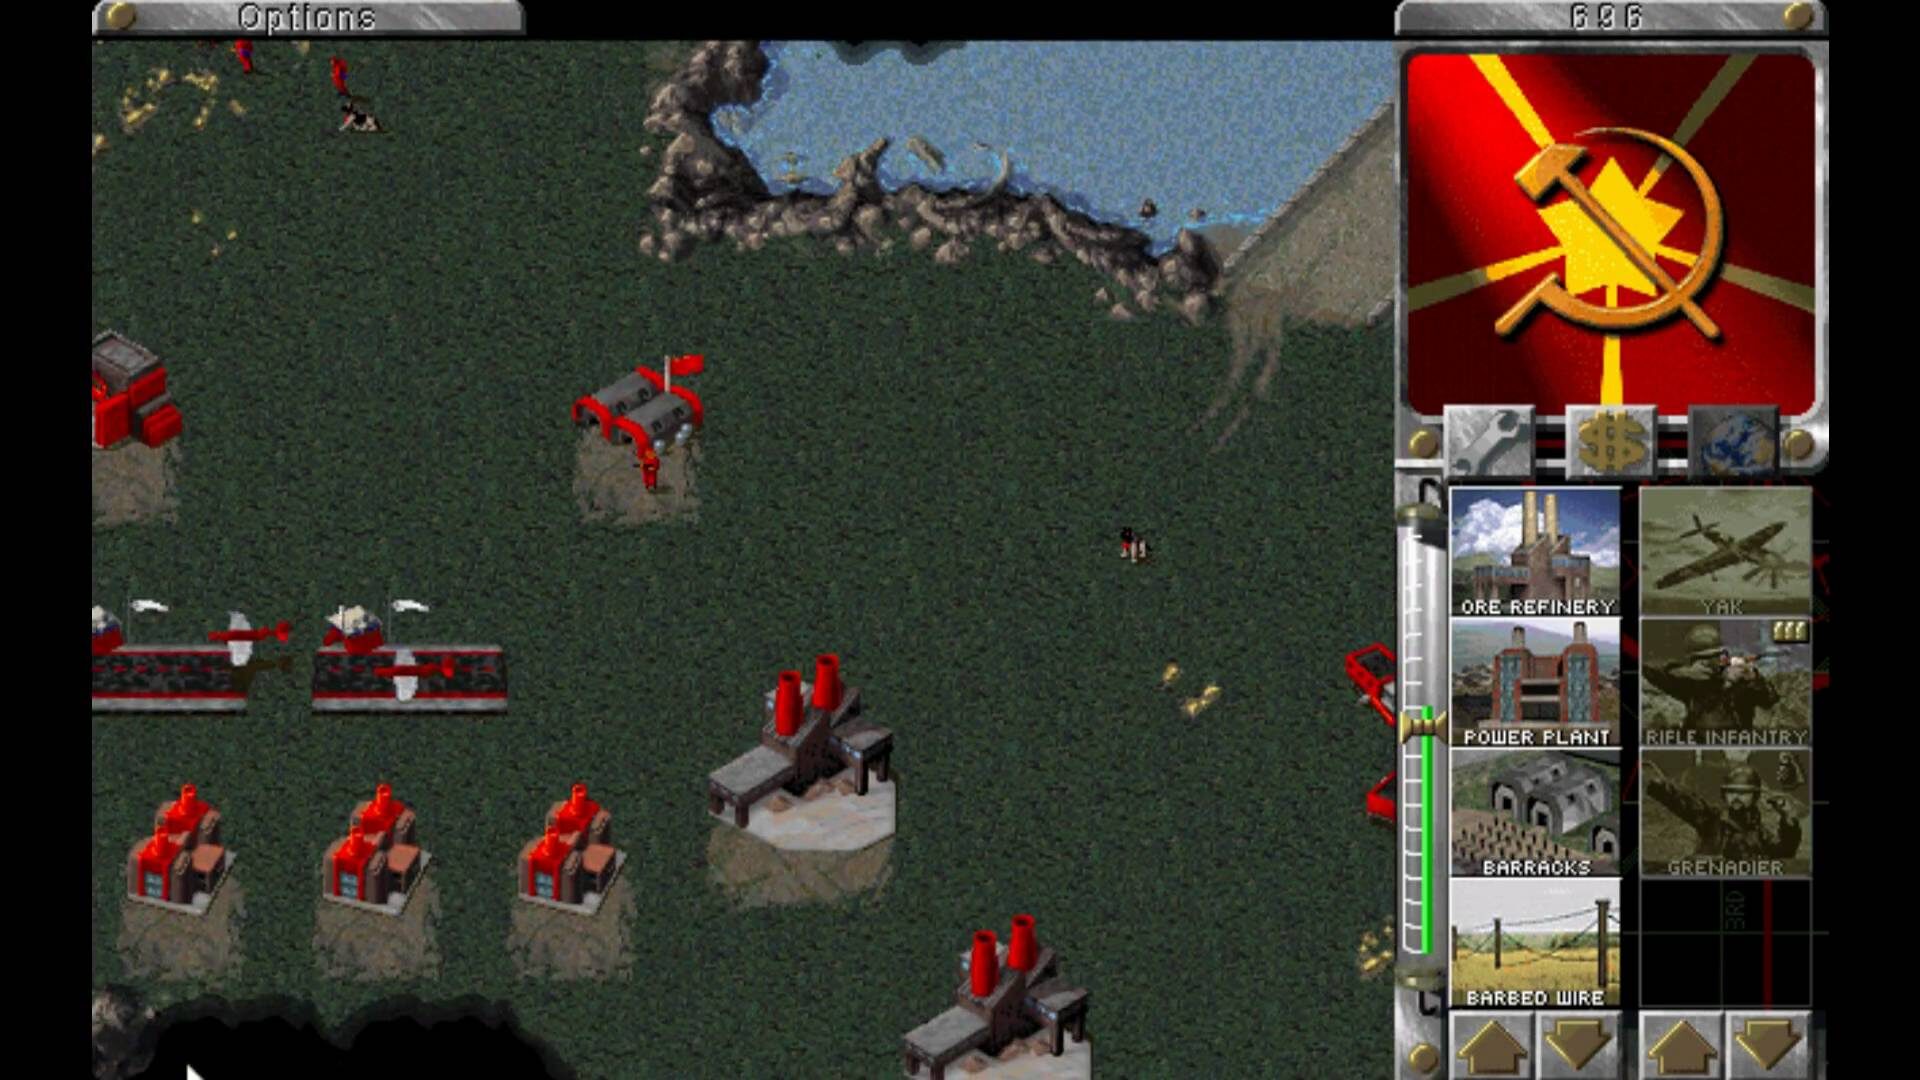 Command returned 1. Игра Red Alert 1. Command and Conquer 1996. Стратегия Red Alert 1. Command Conquer Red Alert 1996.